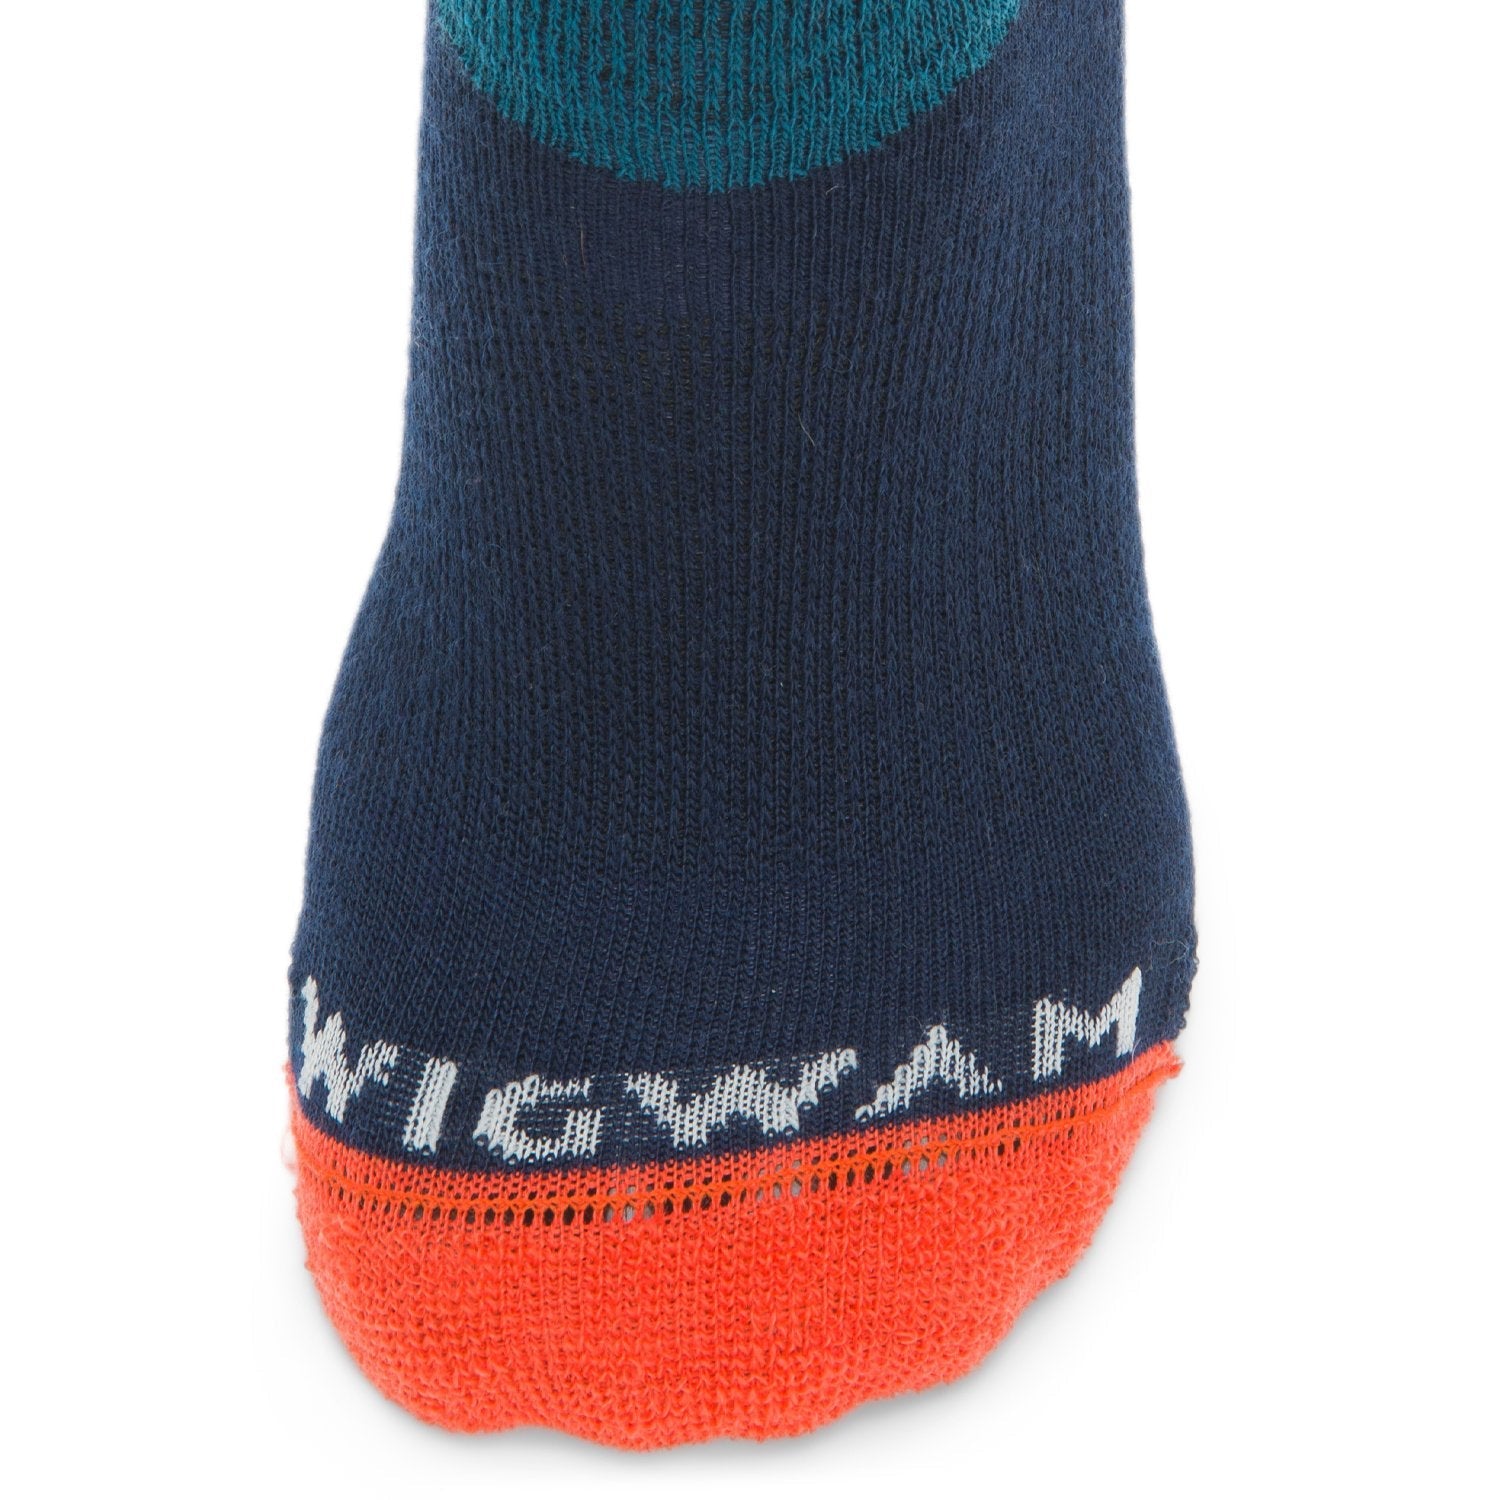 Snow Junkie Lightweight Compression Over-The-Calf Sock - Navy II toe perspective - made in The USA Wigwam Socks